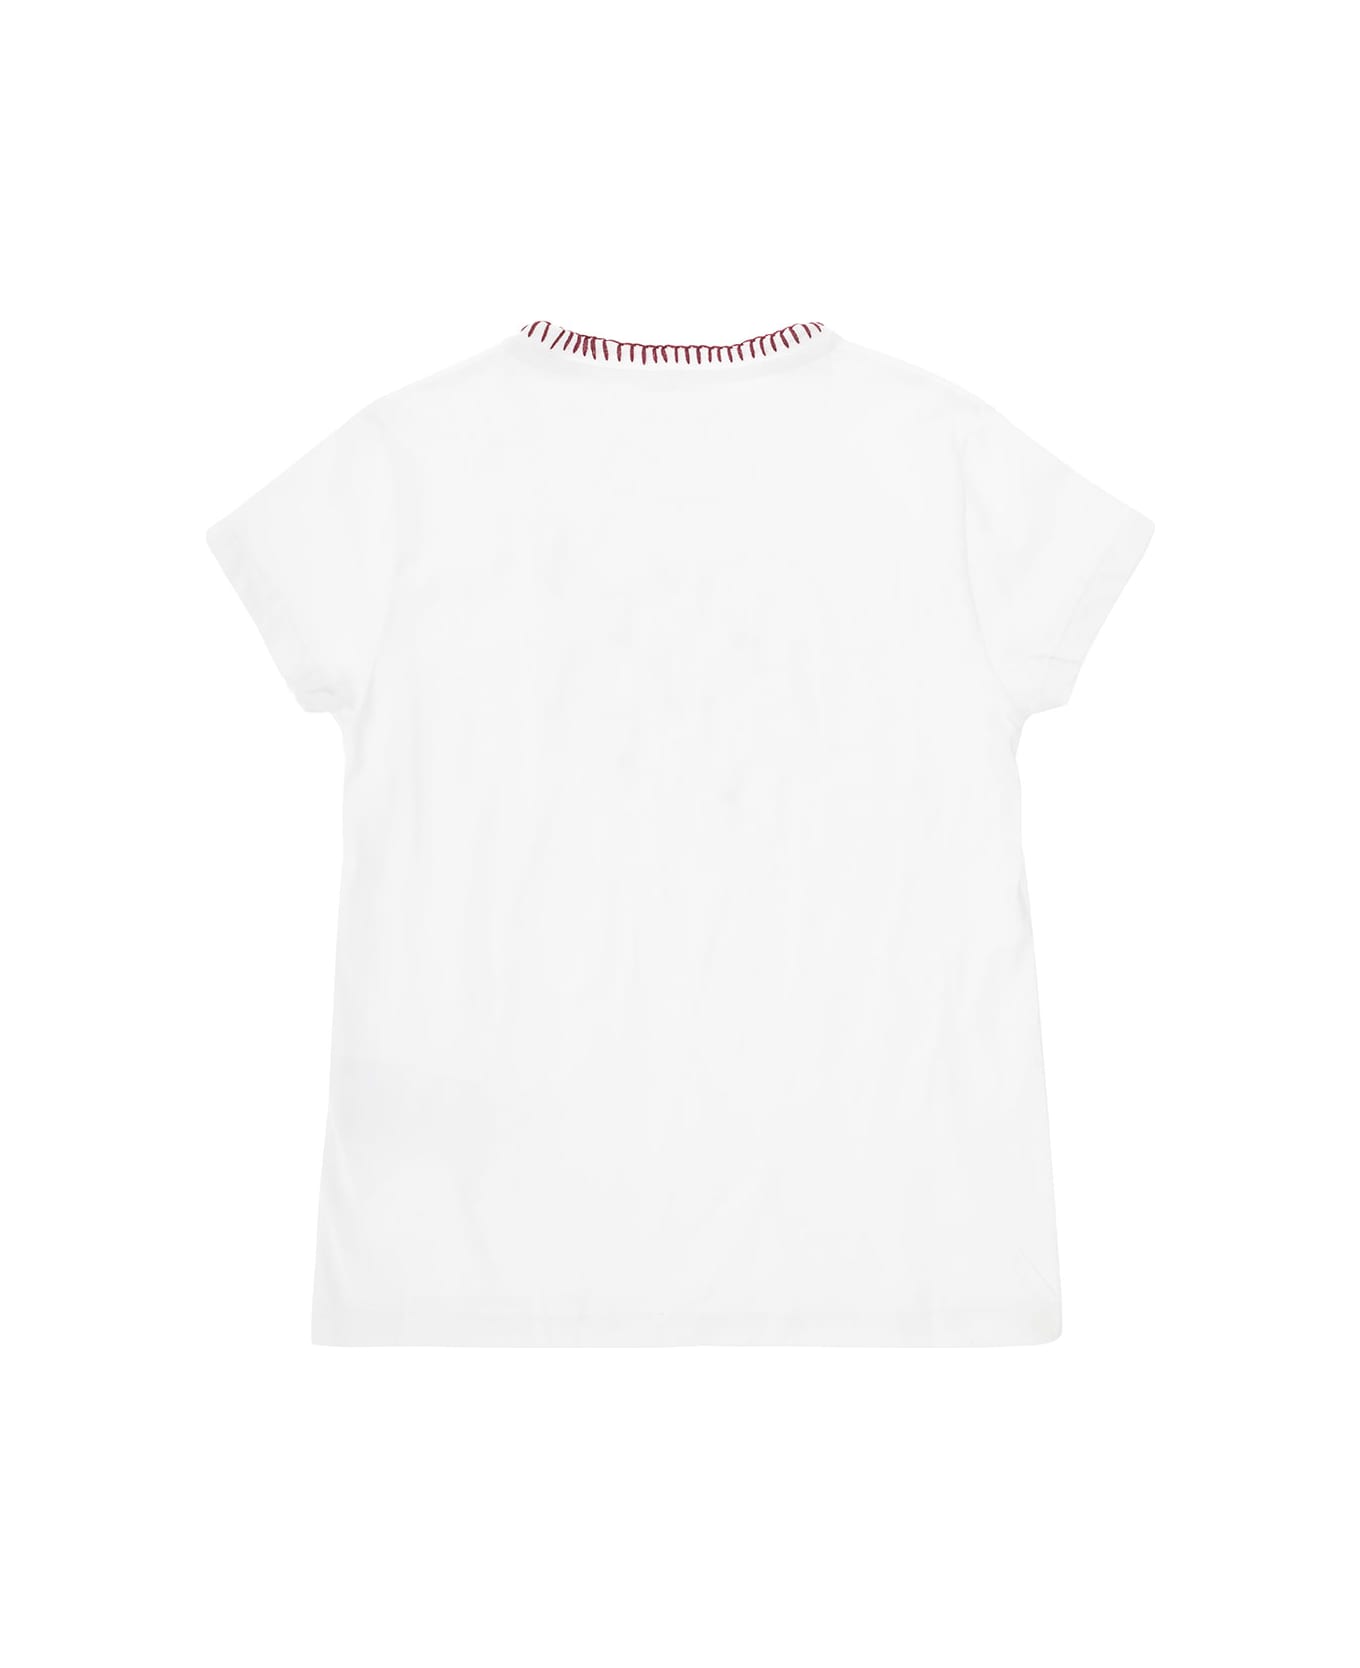 Golden Goose Journey/ Girl's T-shirt/ Cotton Jersey With Golden And Neck Embroidery Include Il Codice Gyp01390 | P001298 -10100 - White